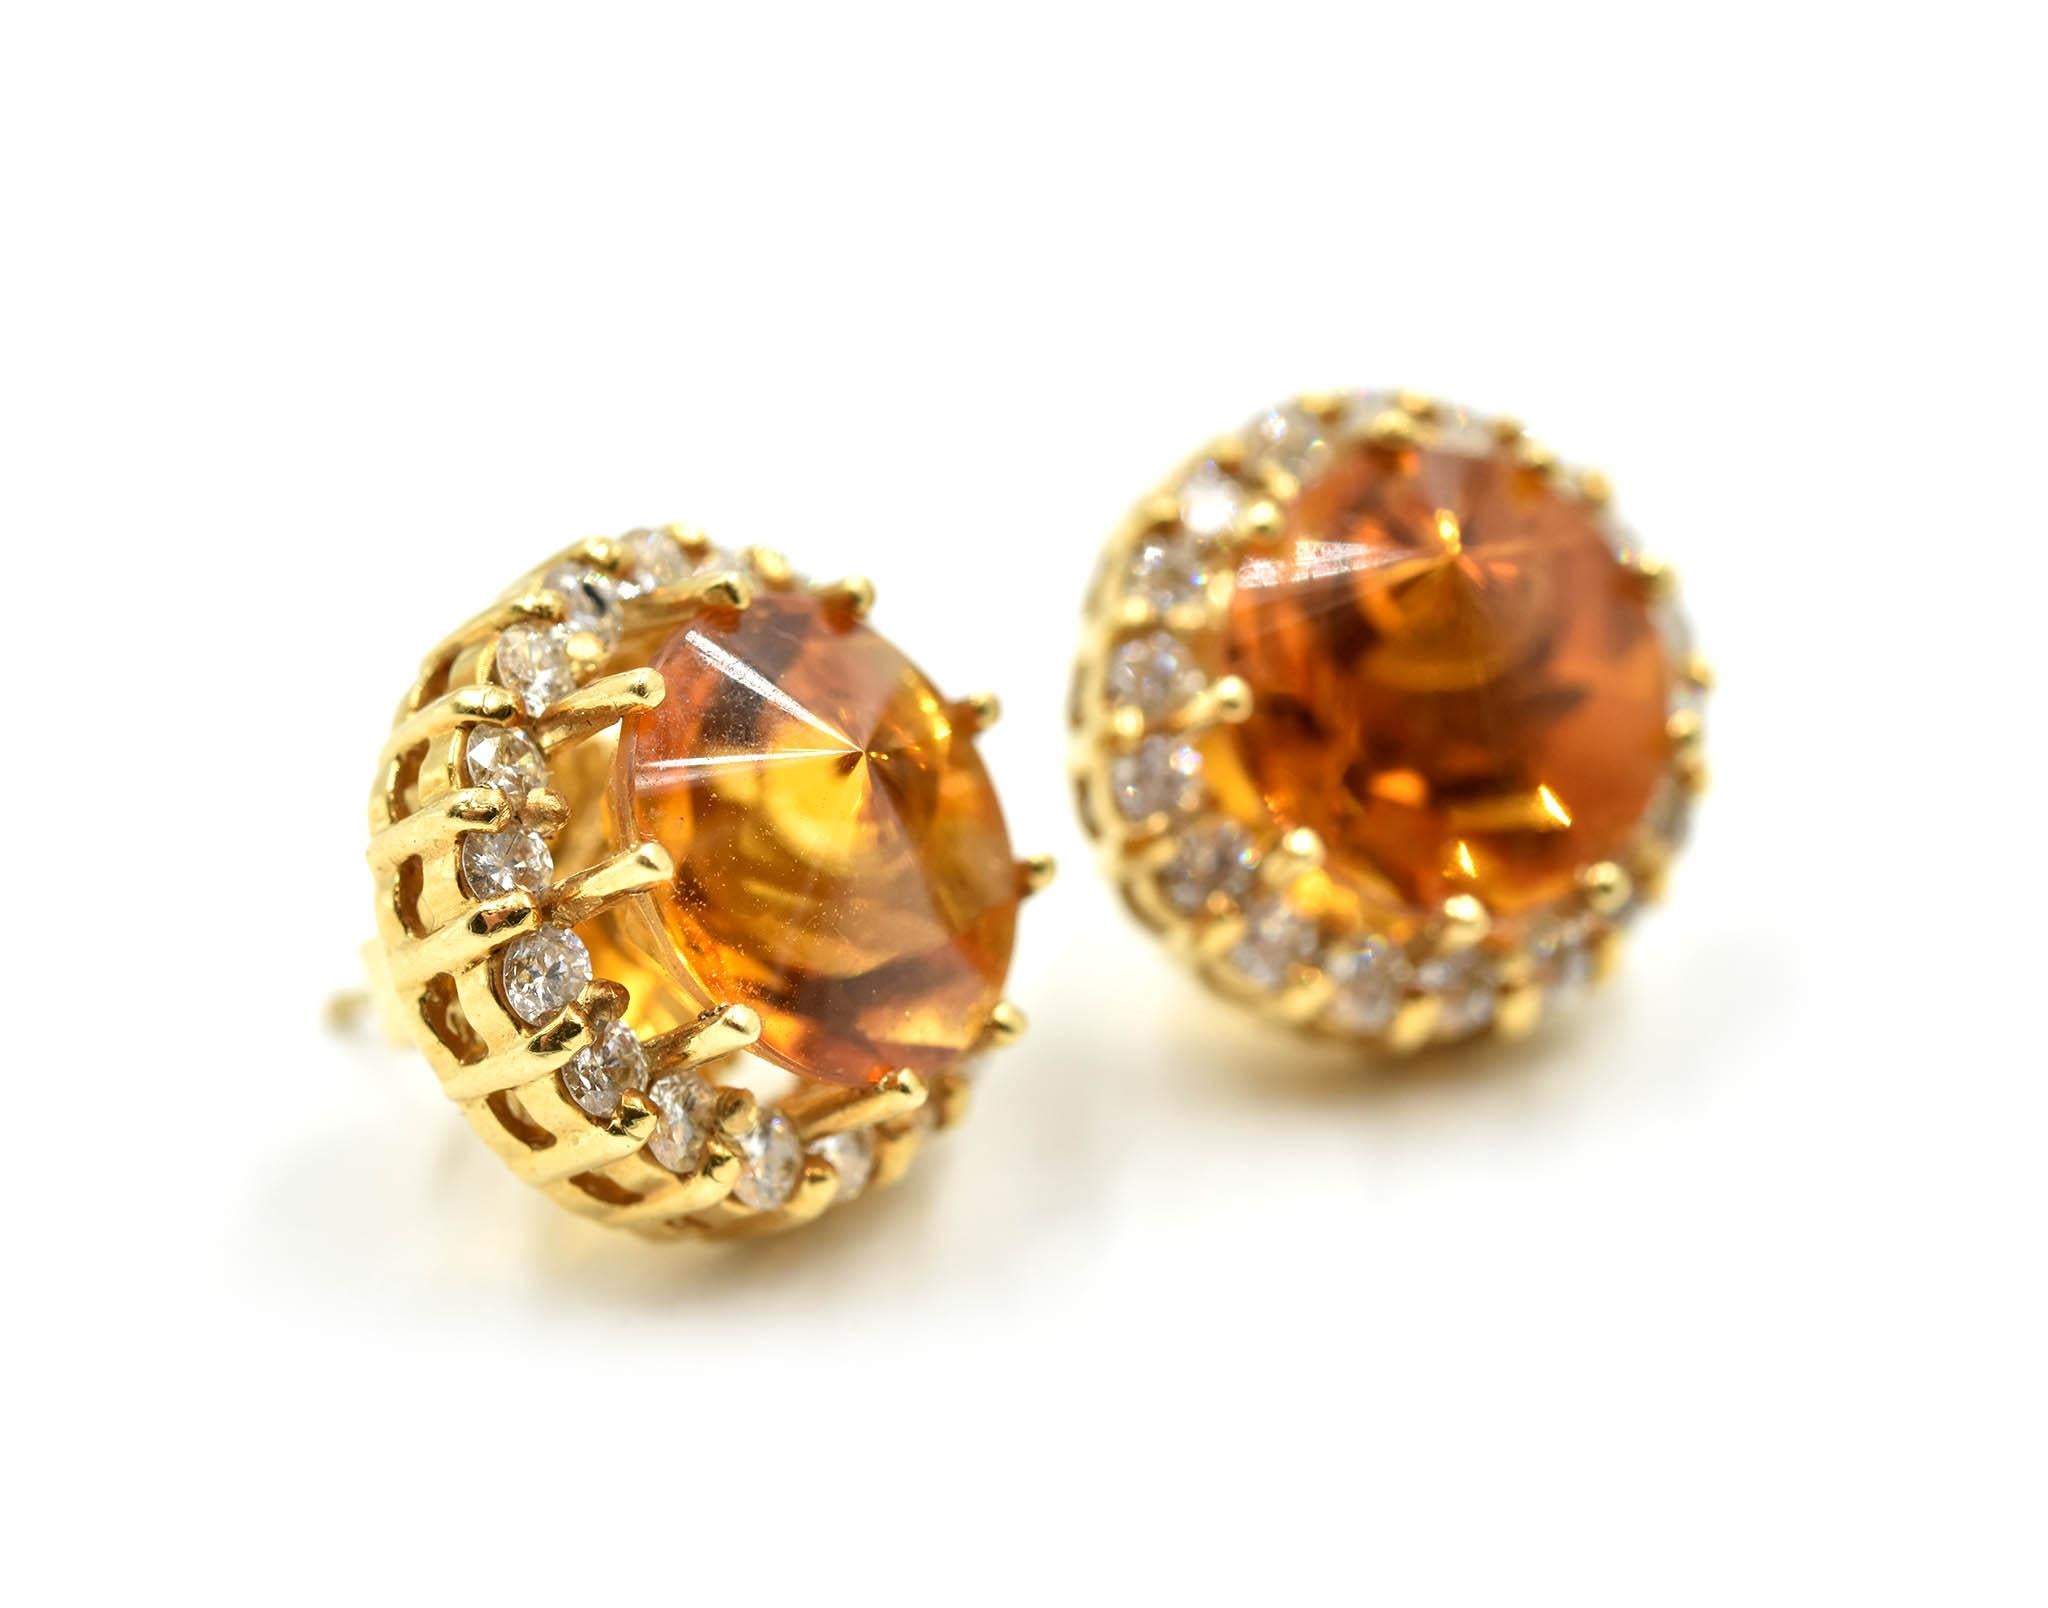 This is a pair of 18k yellow gold earrings featuring fantasy cut citrine gemstones with round diamond halos! Each citrine is cut in a cabochon type shape with a point, and is faceted underneath. Total weight of the citrine gemstones is 4.00 carats.